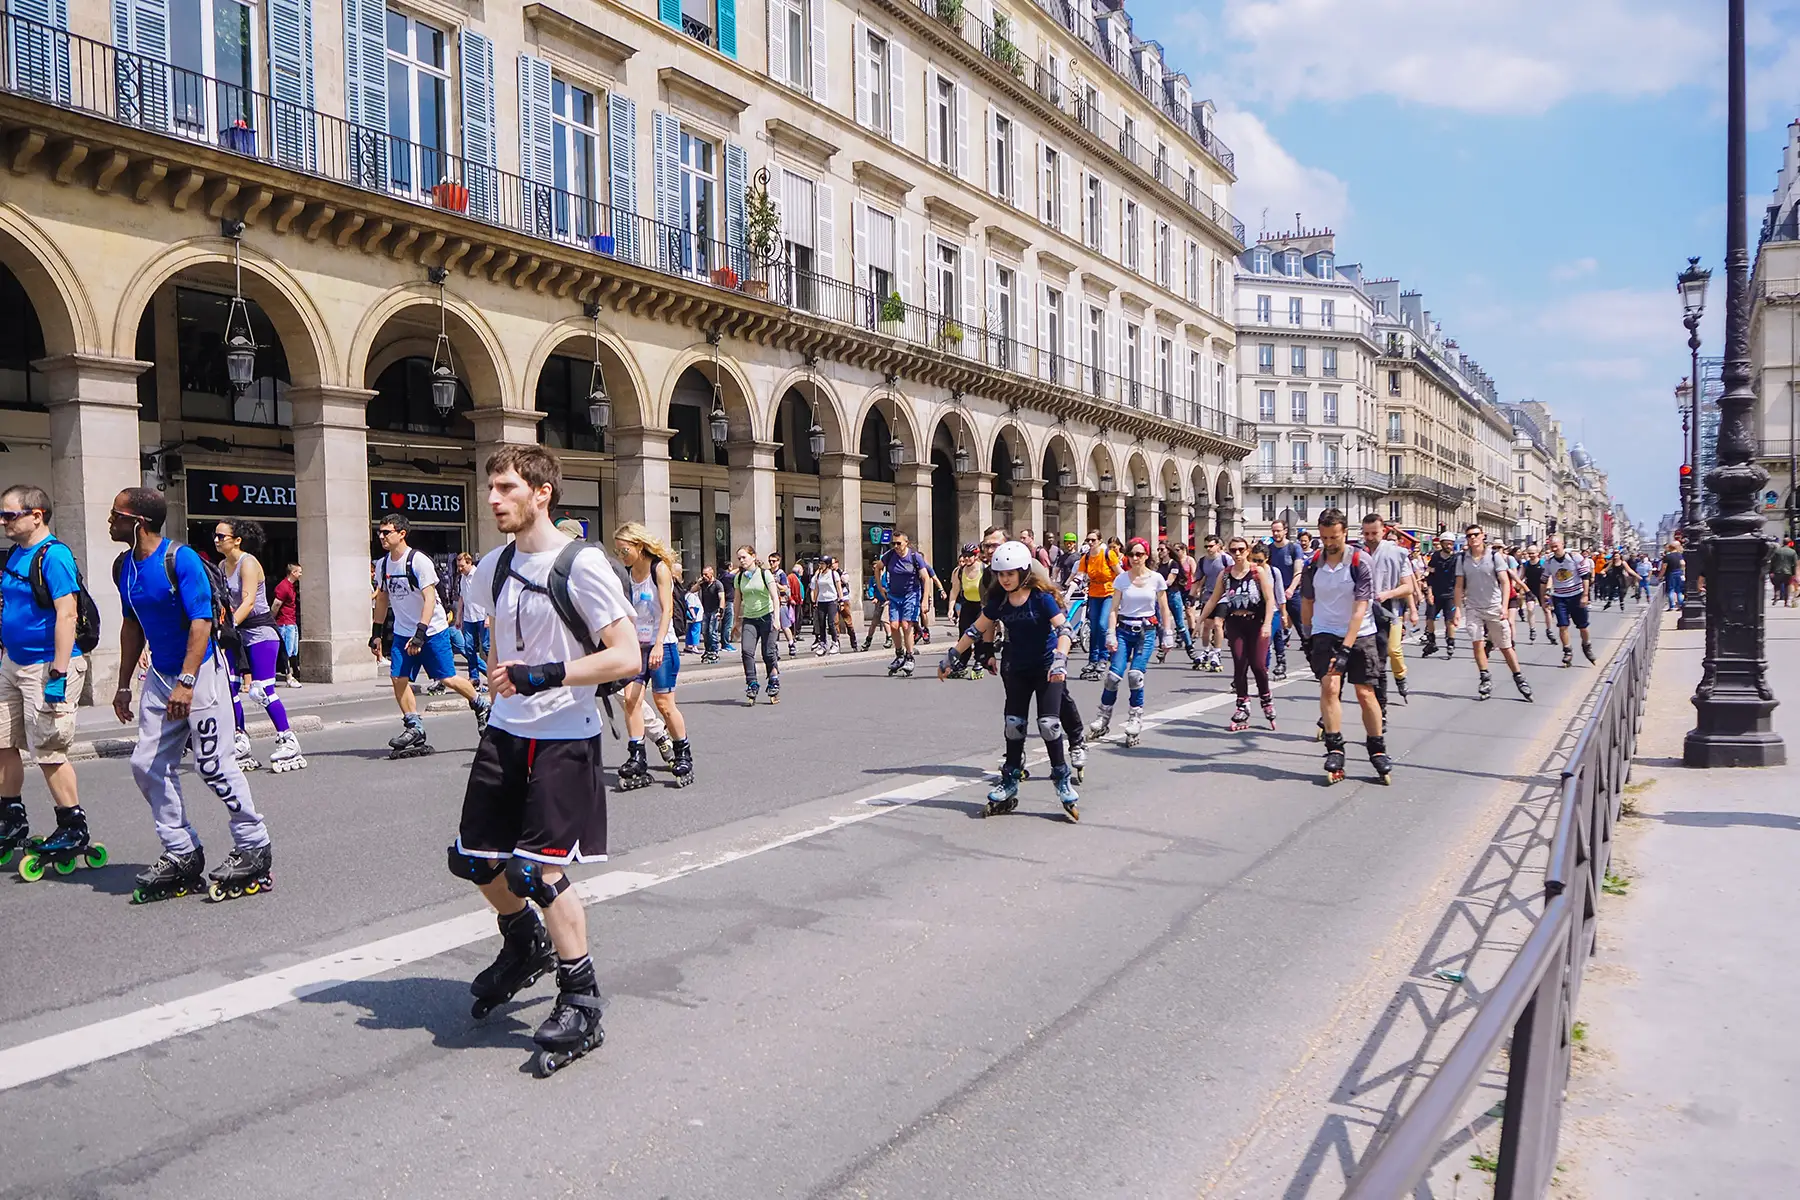 A mass rollerblading event in Paris